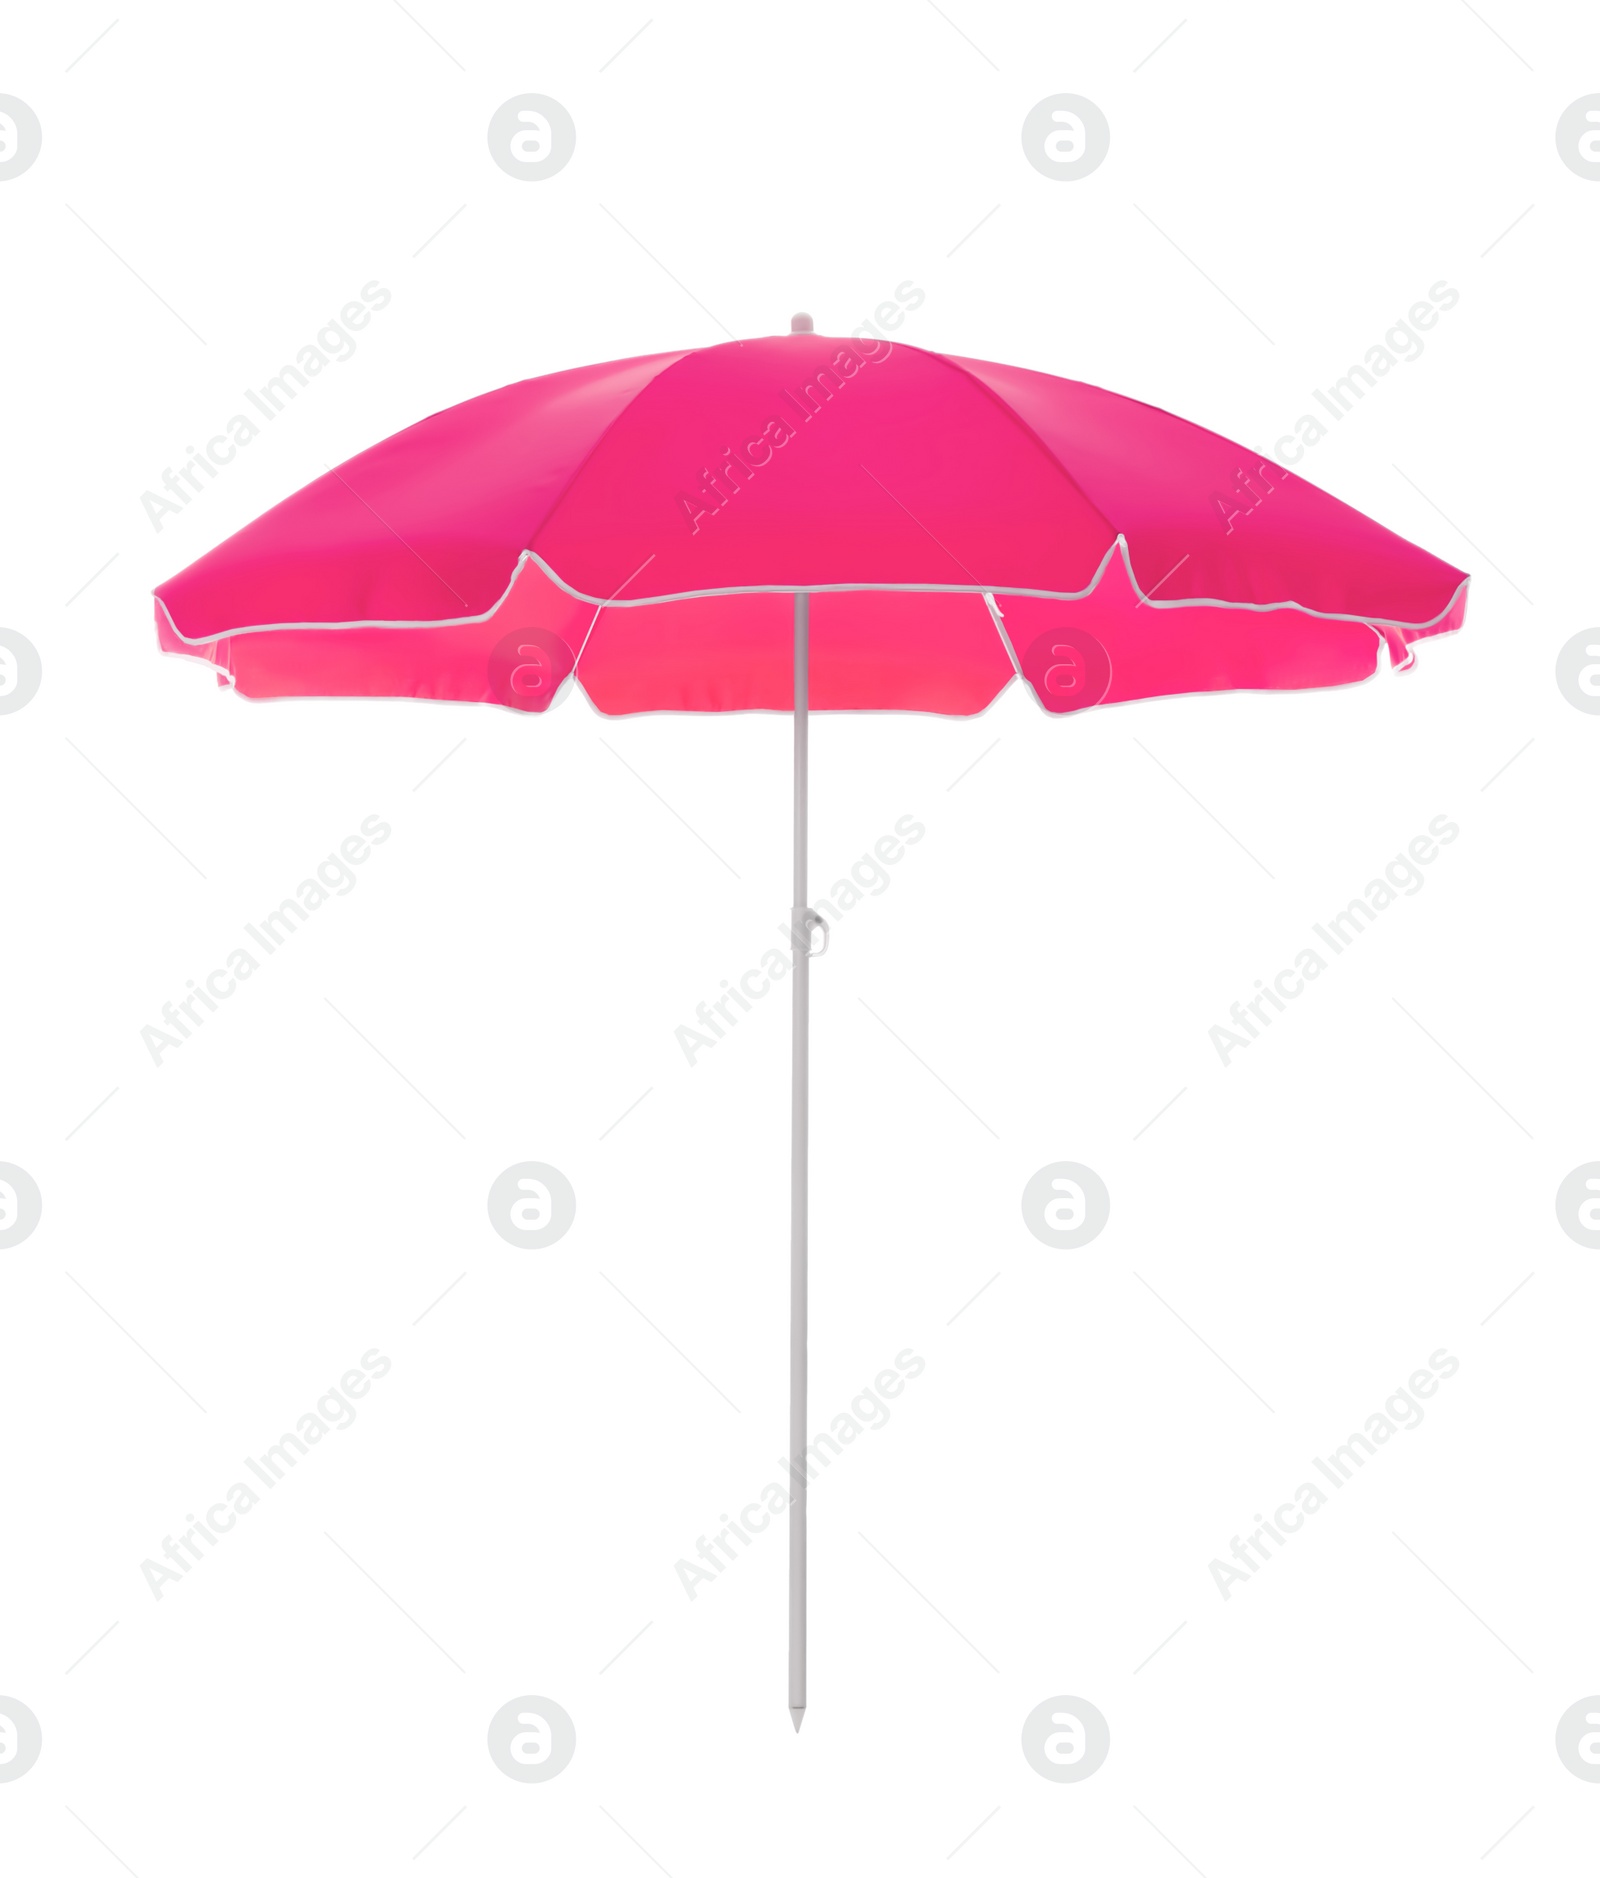 Image of Open pink beach umbrella isolated on white